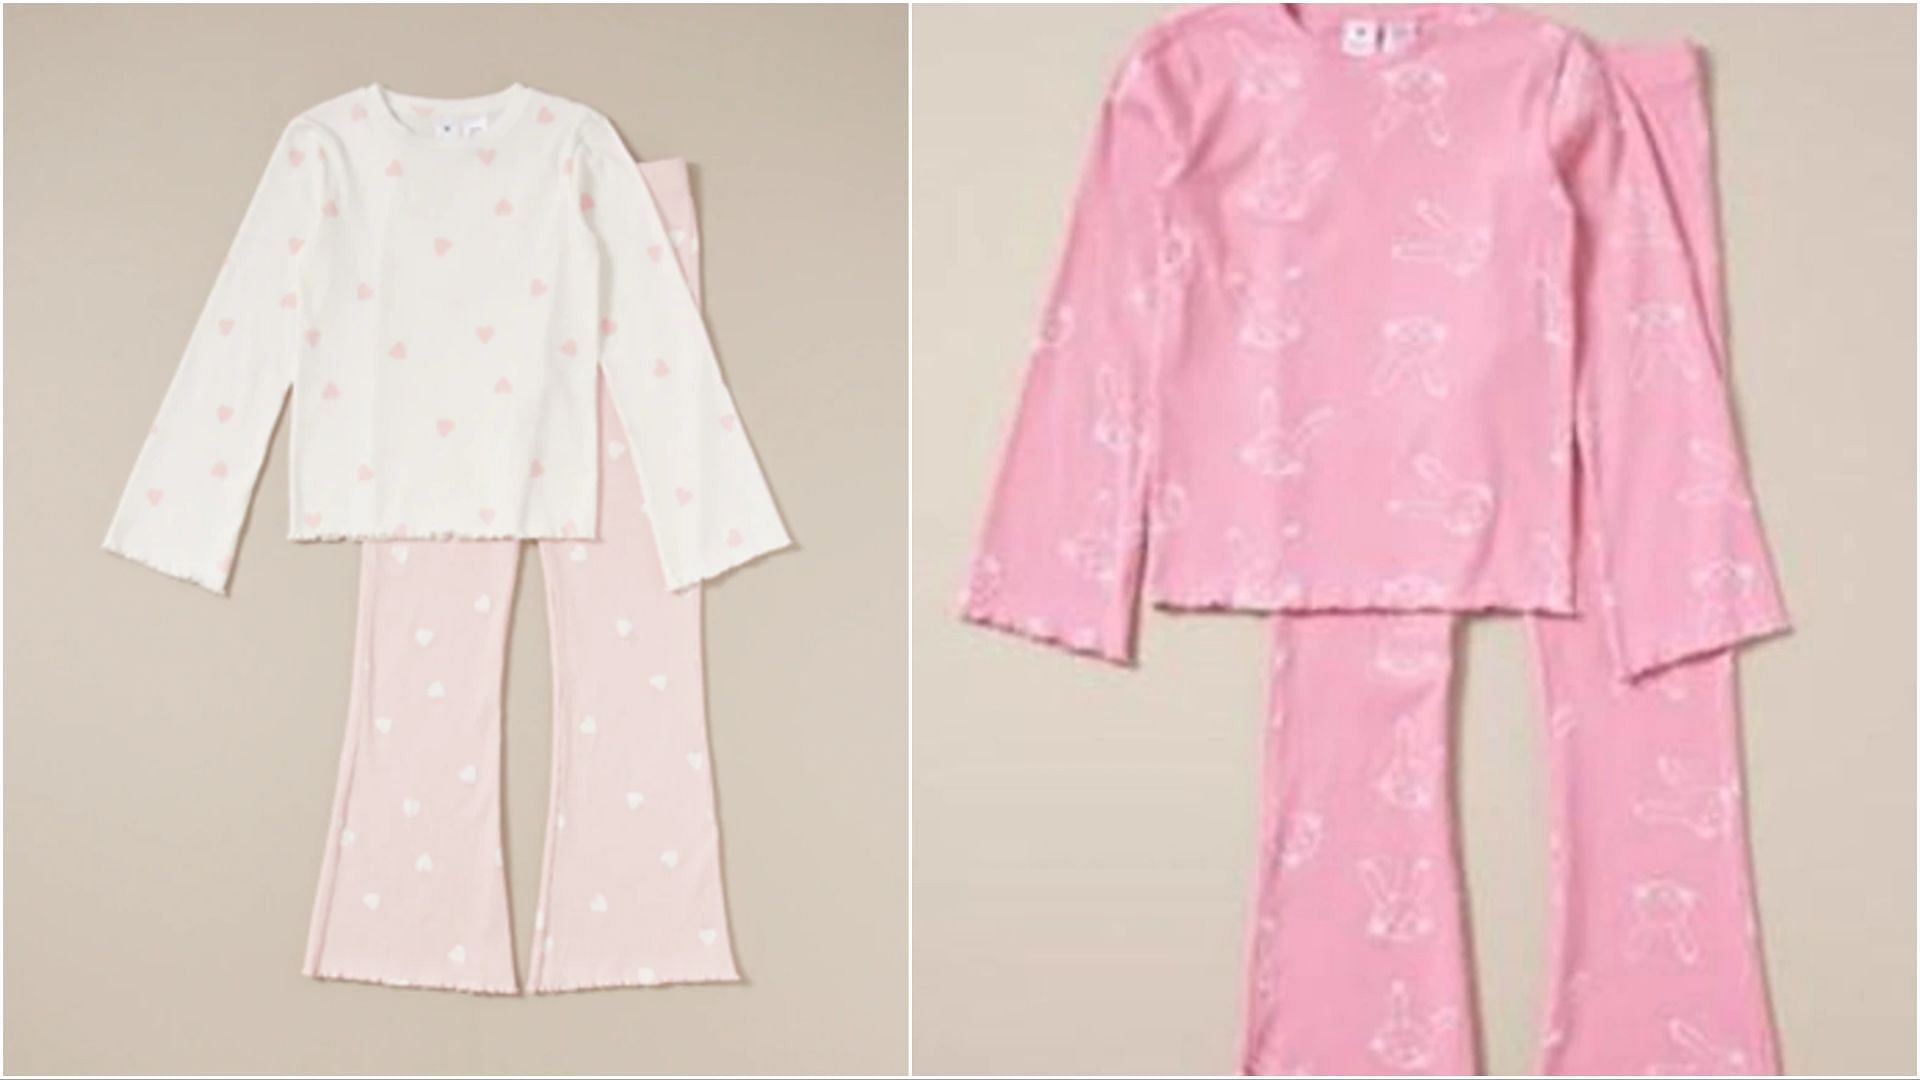 The recalled Target pajama sets were sold at Target stores nationally and were also available online (Image via Target)